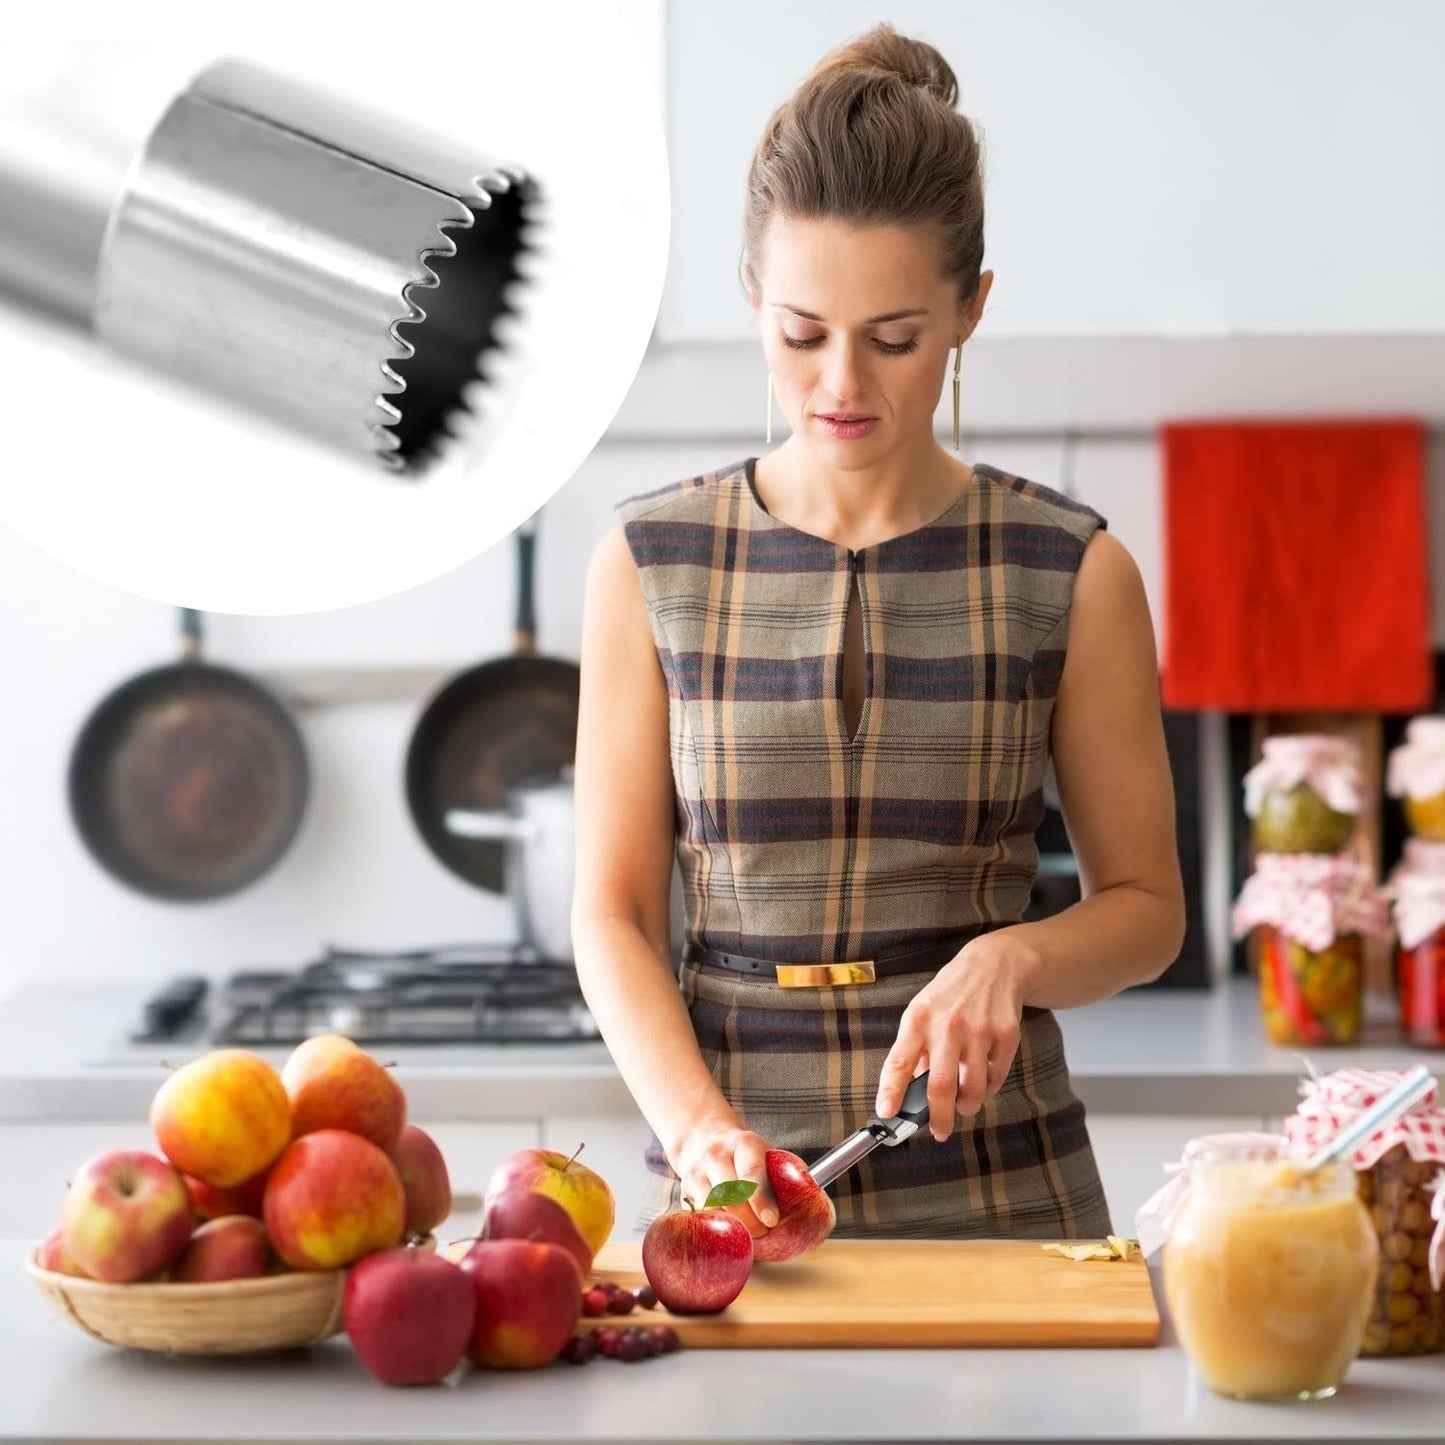 A woman is in a kitchen using an apple corer to core an apple.  There is an inset closeup image of the serrated tip of the corer.